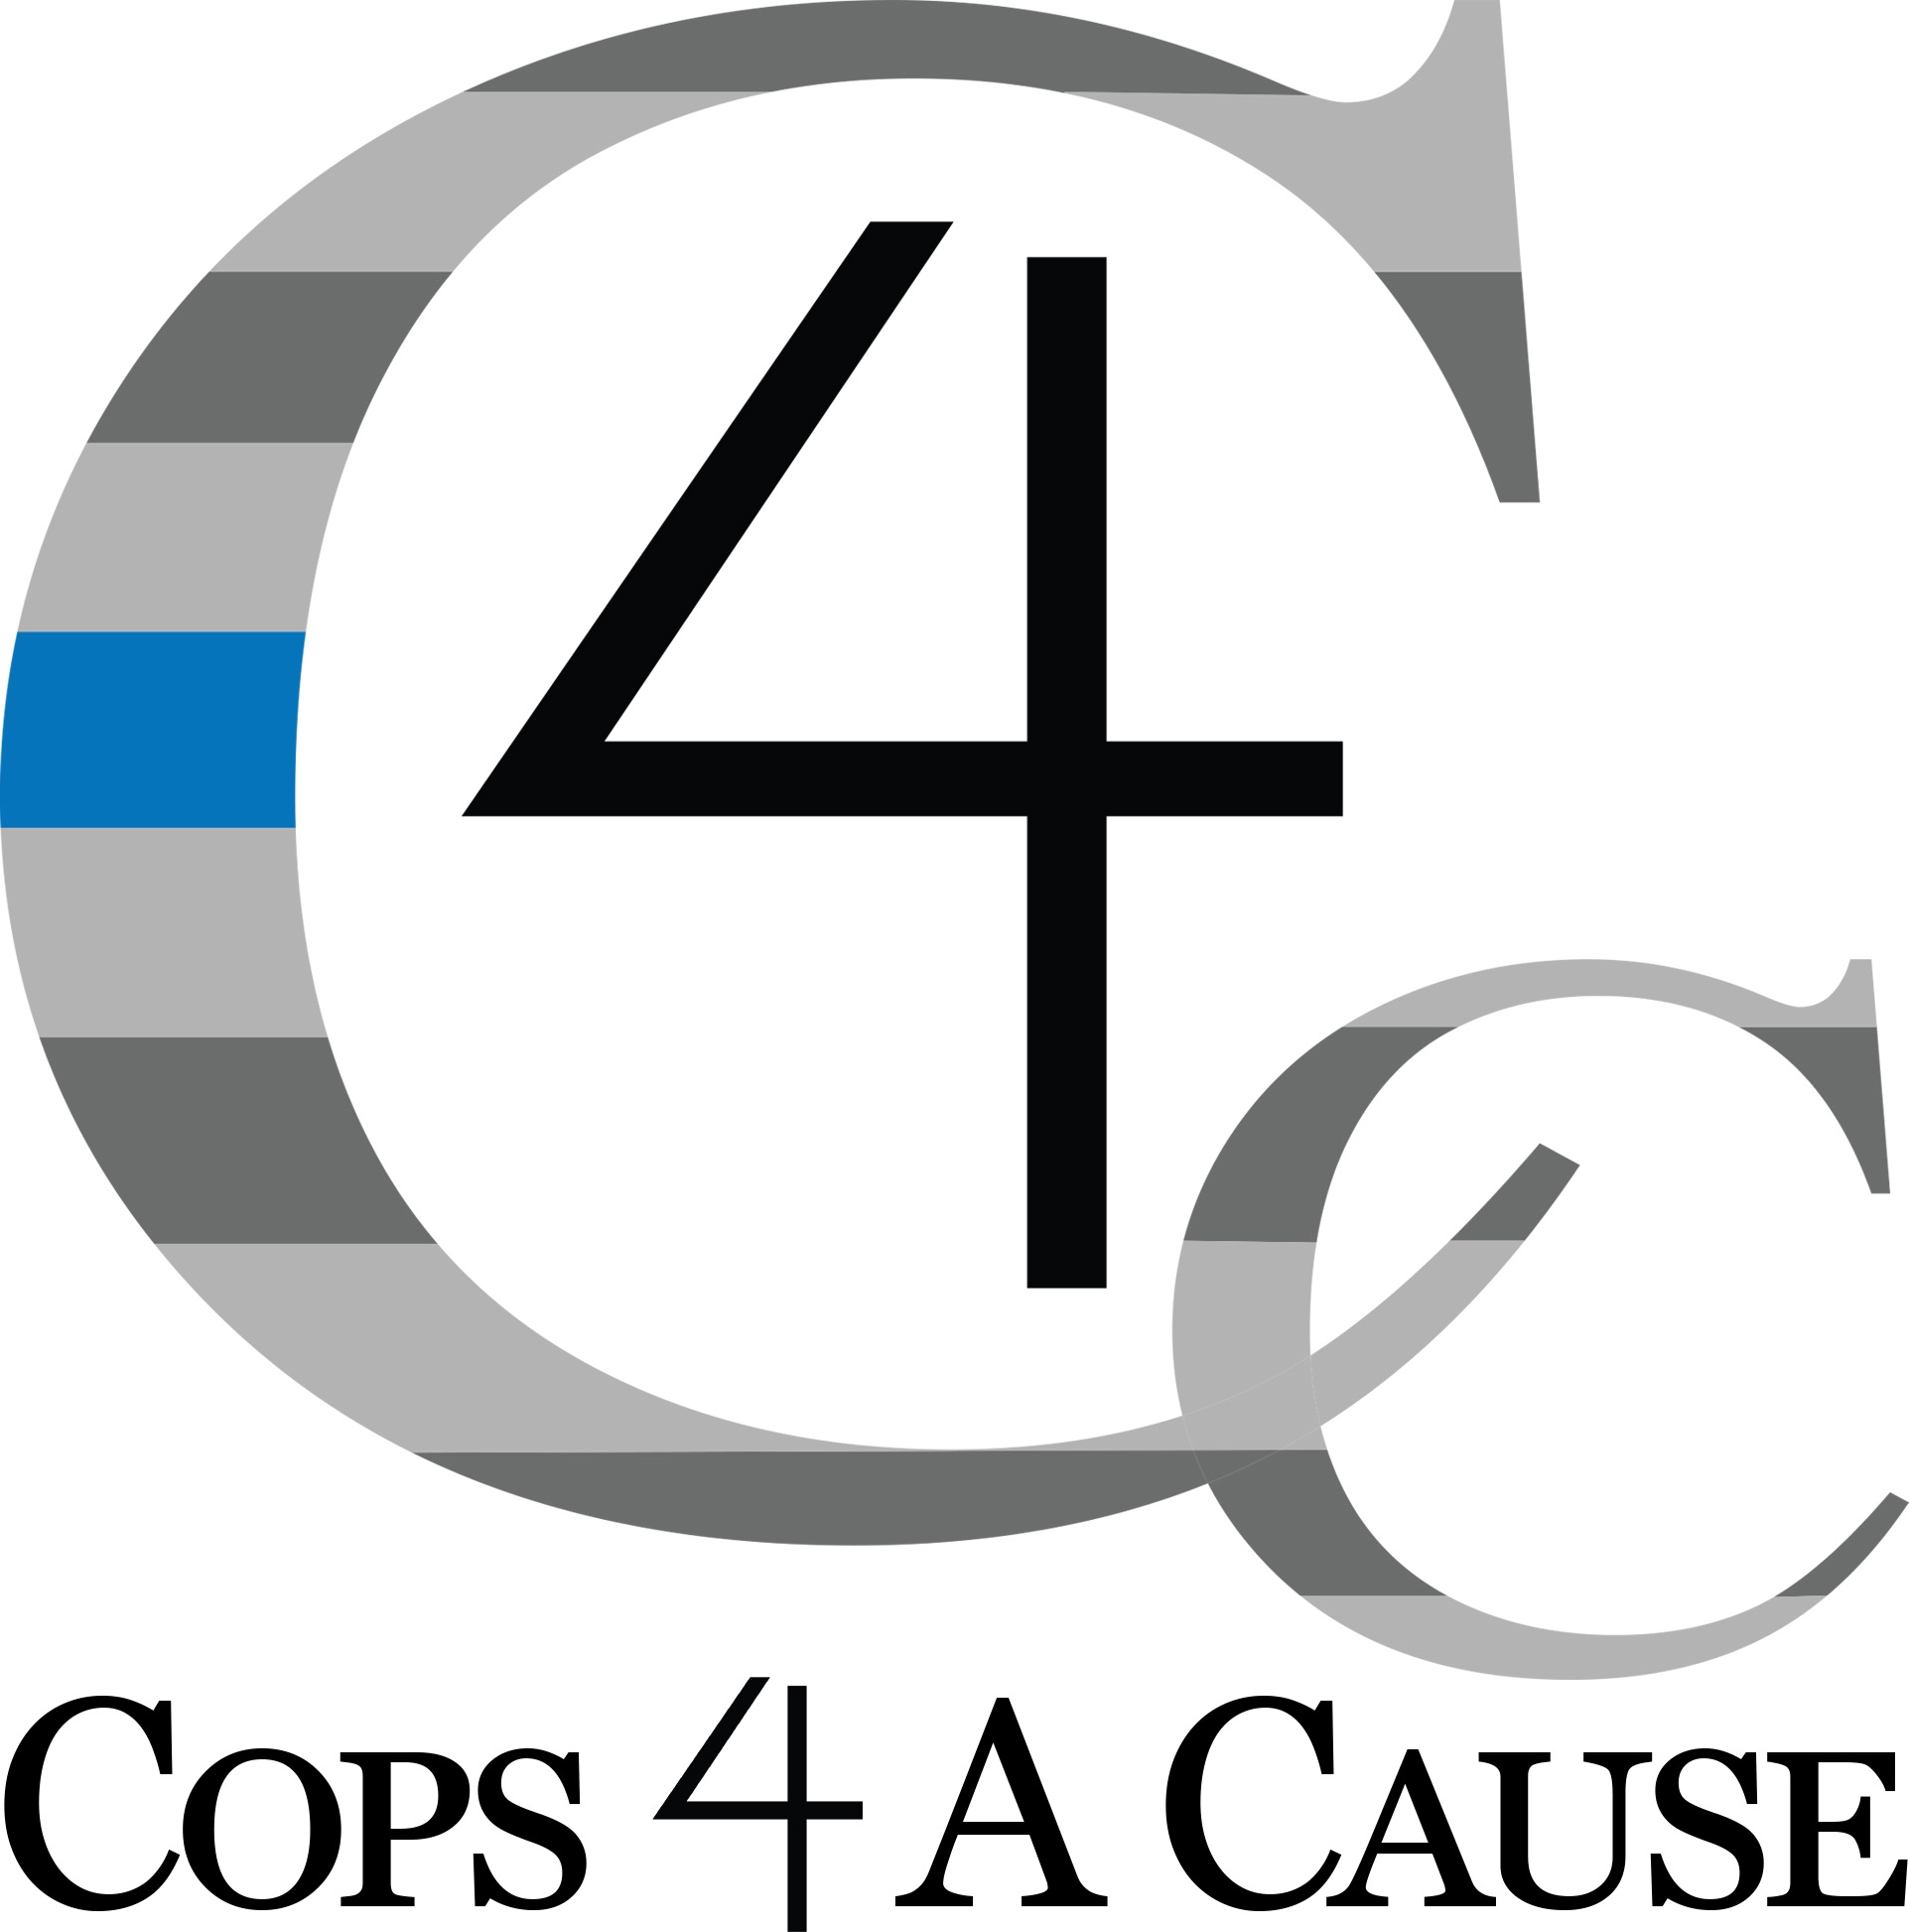 Cops 4 A Cause comes in as top sponsor for Owego’s Strawberry Festival